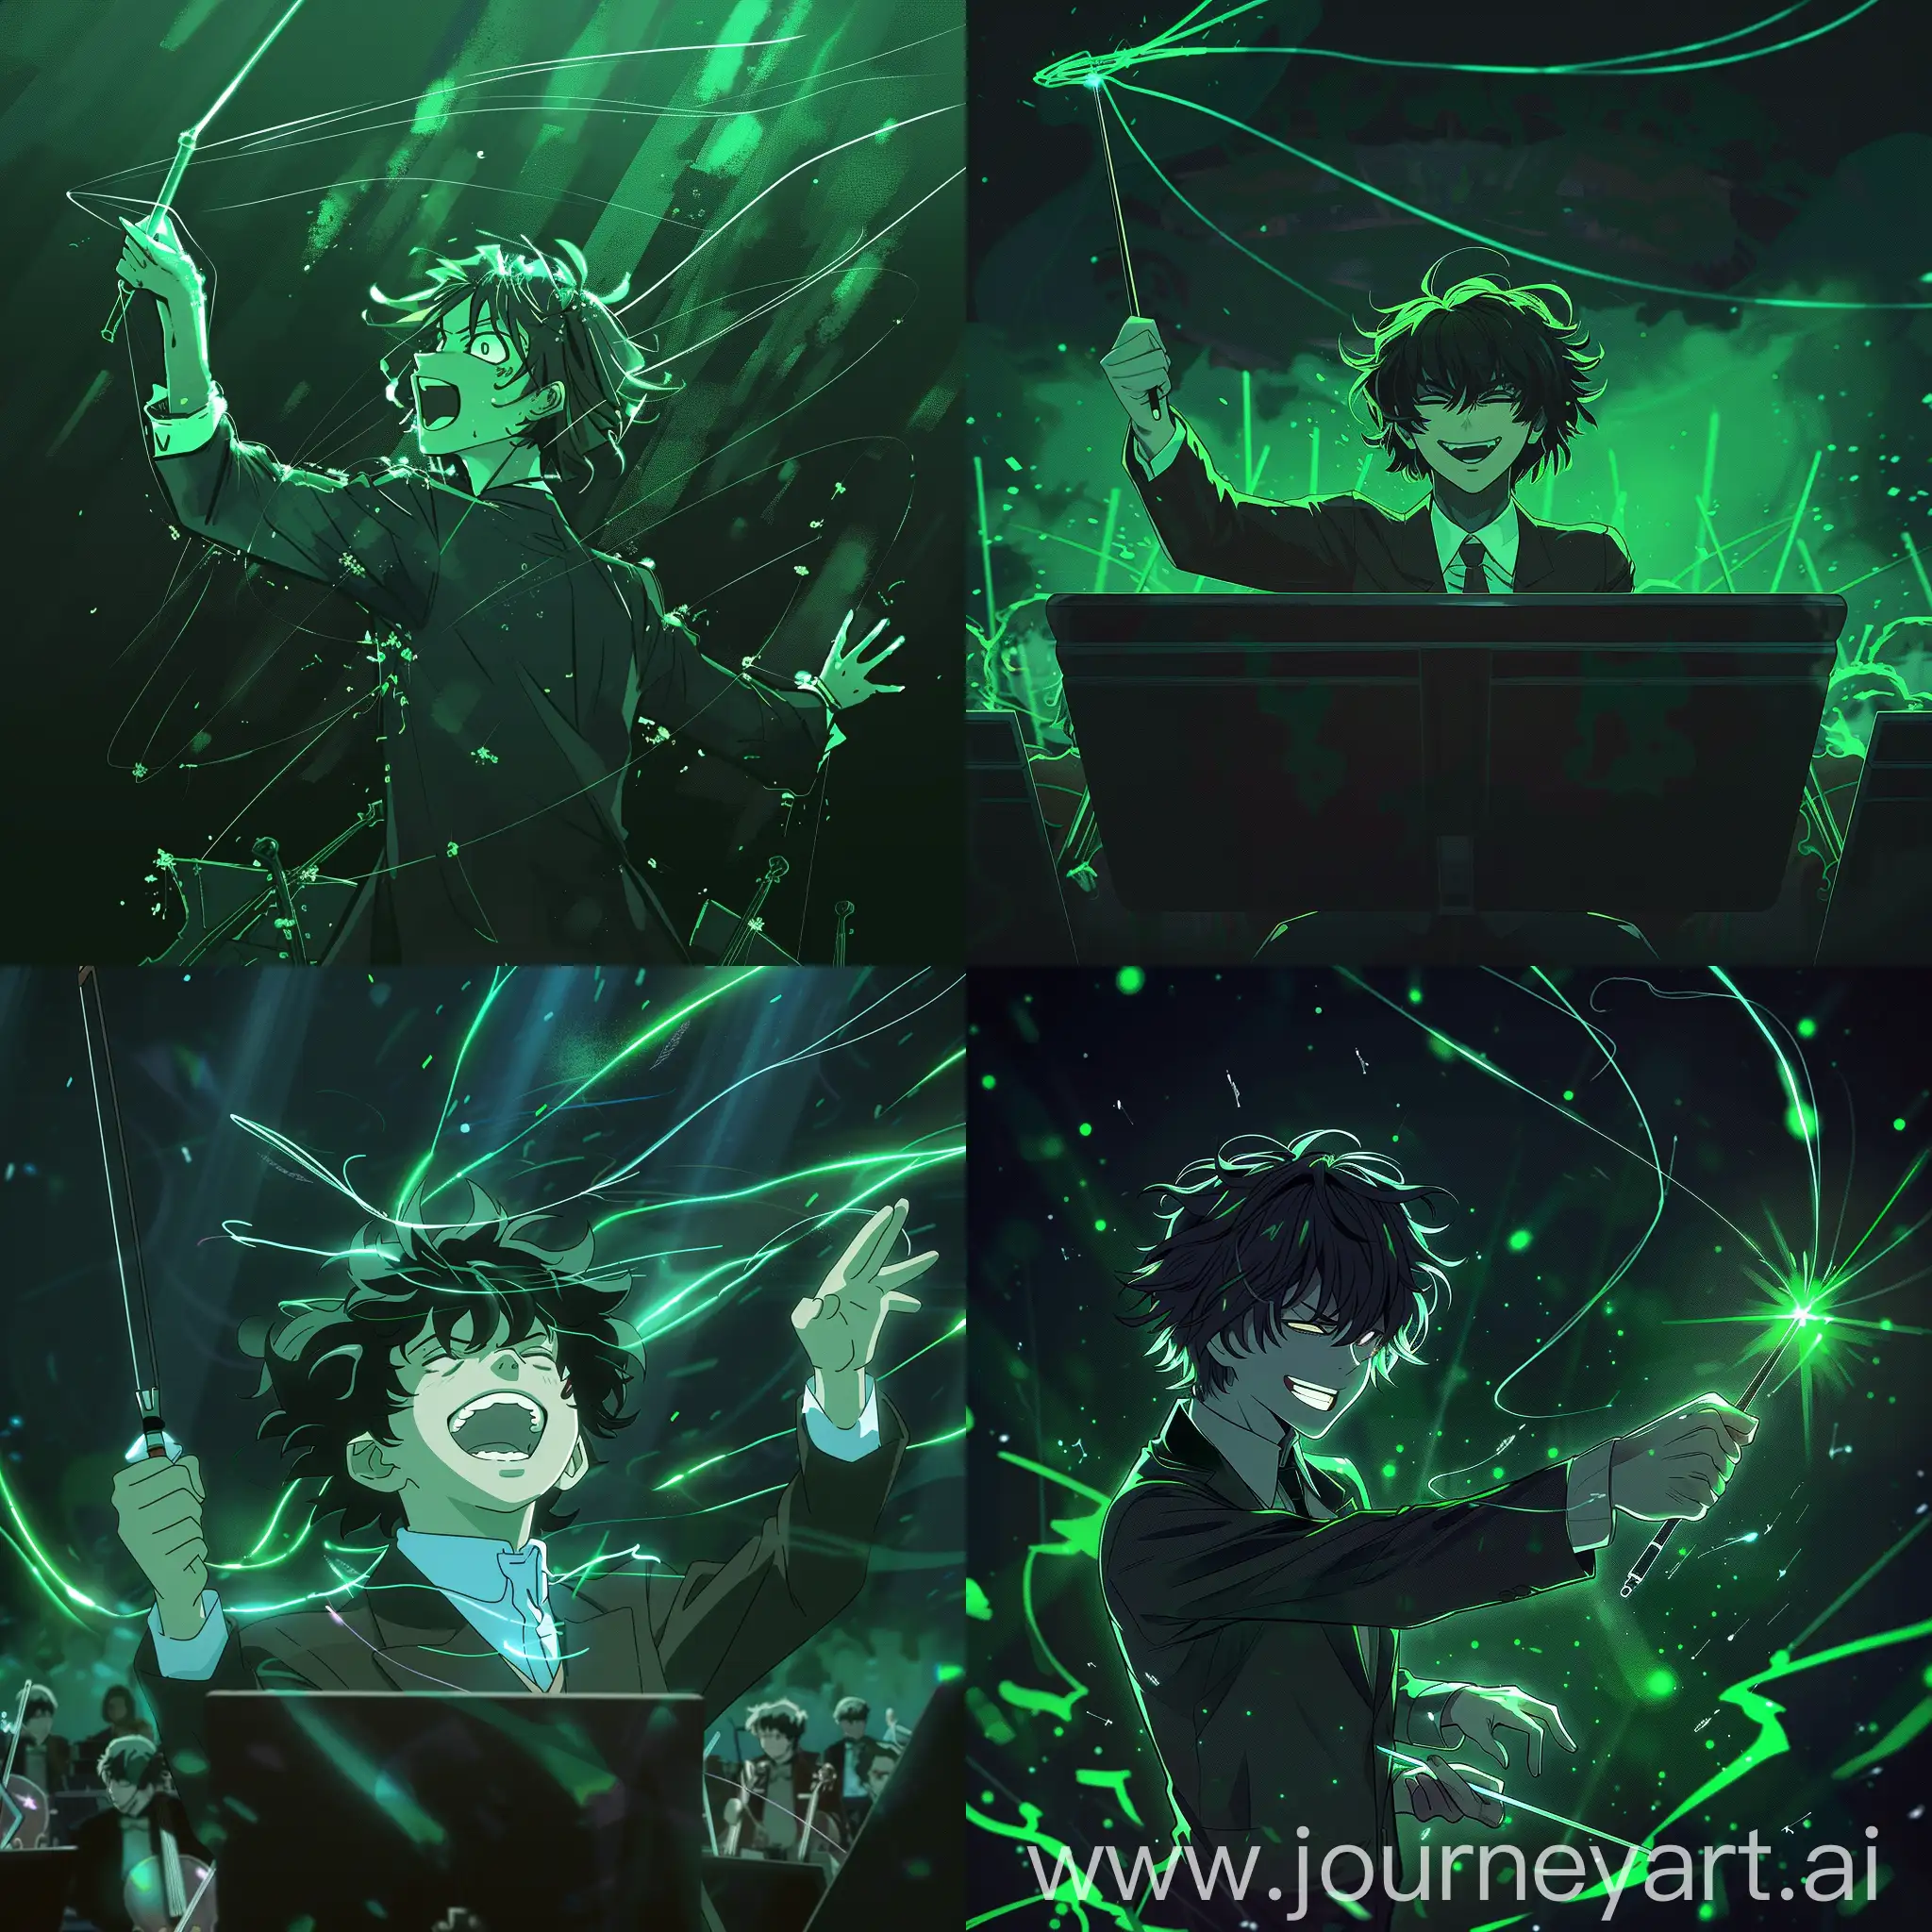 Psychopathic-Conductor-Manipulating-Emotions-in-Anime-Realism-Style